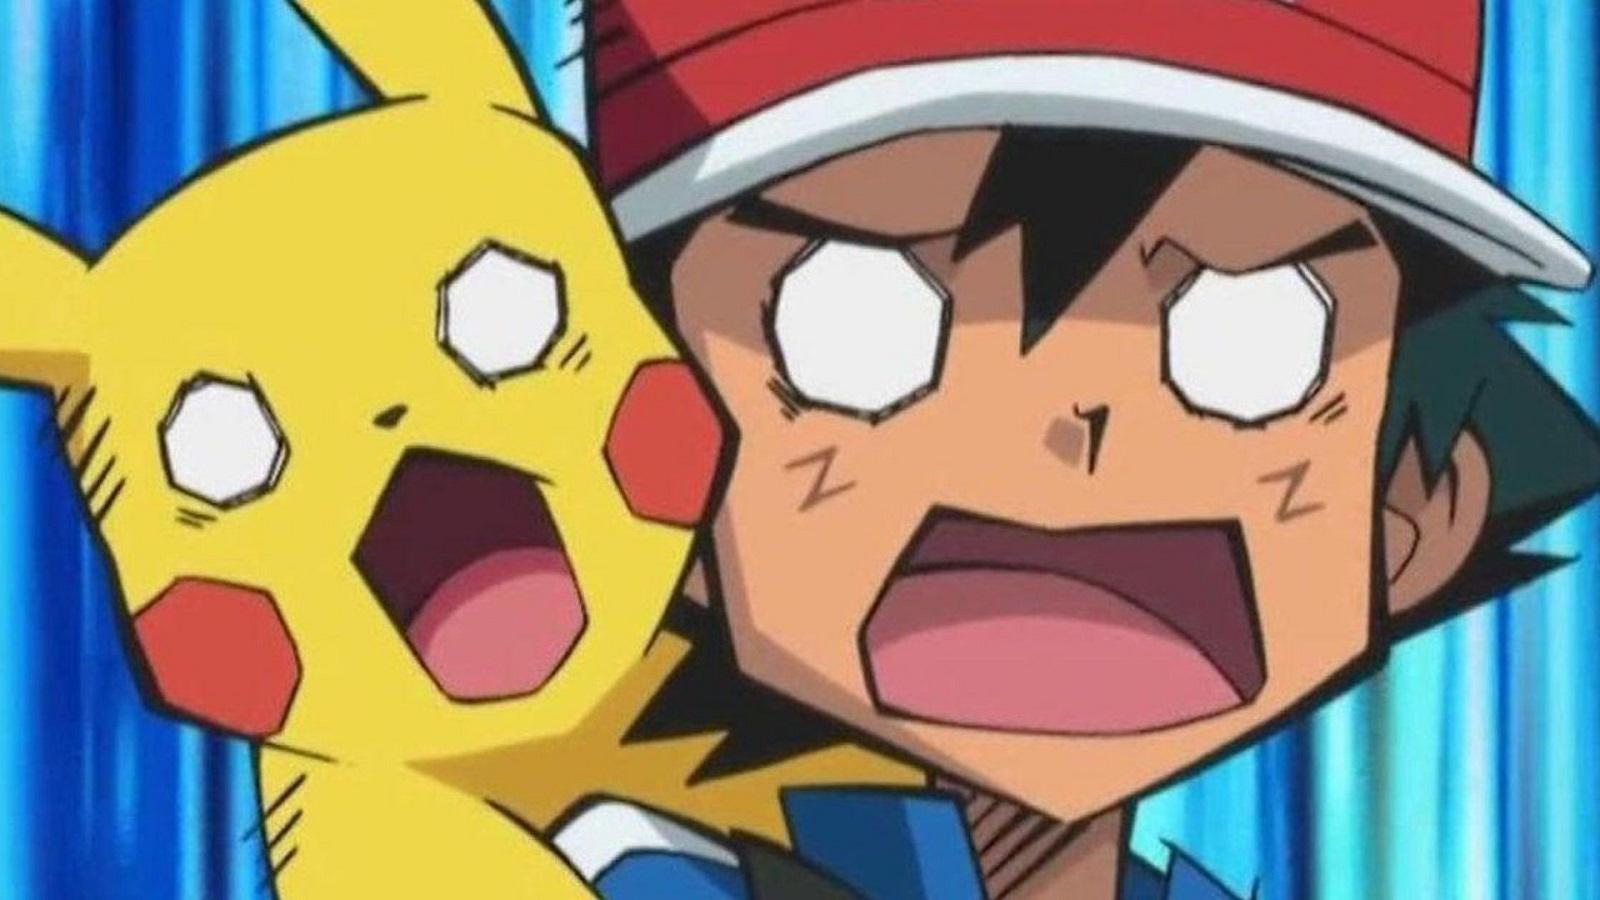 Ash and Pikachu looking shocked